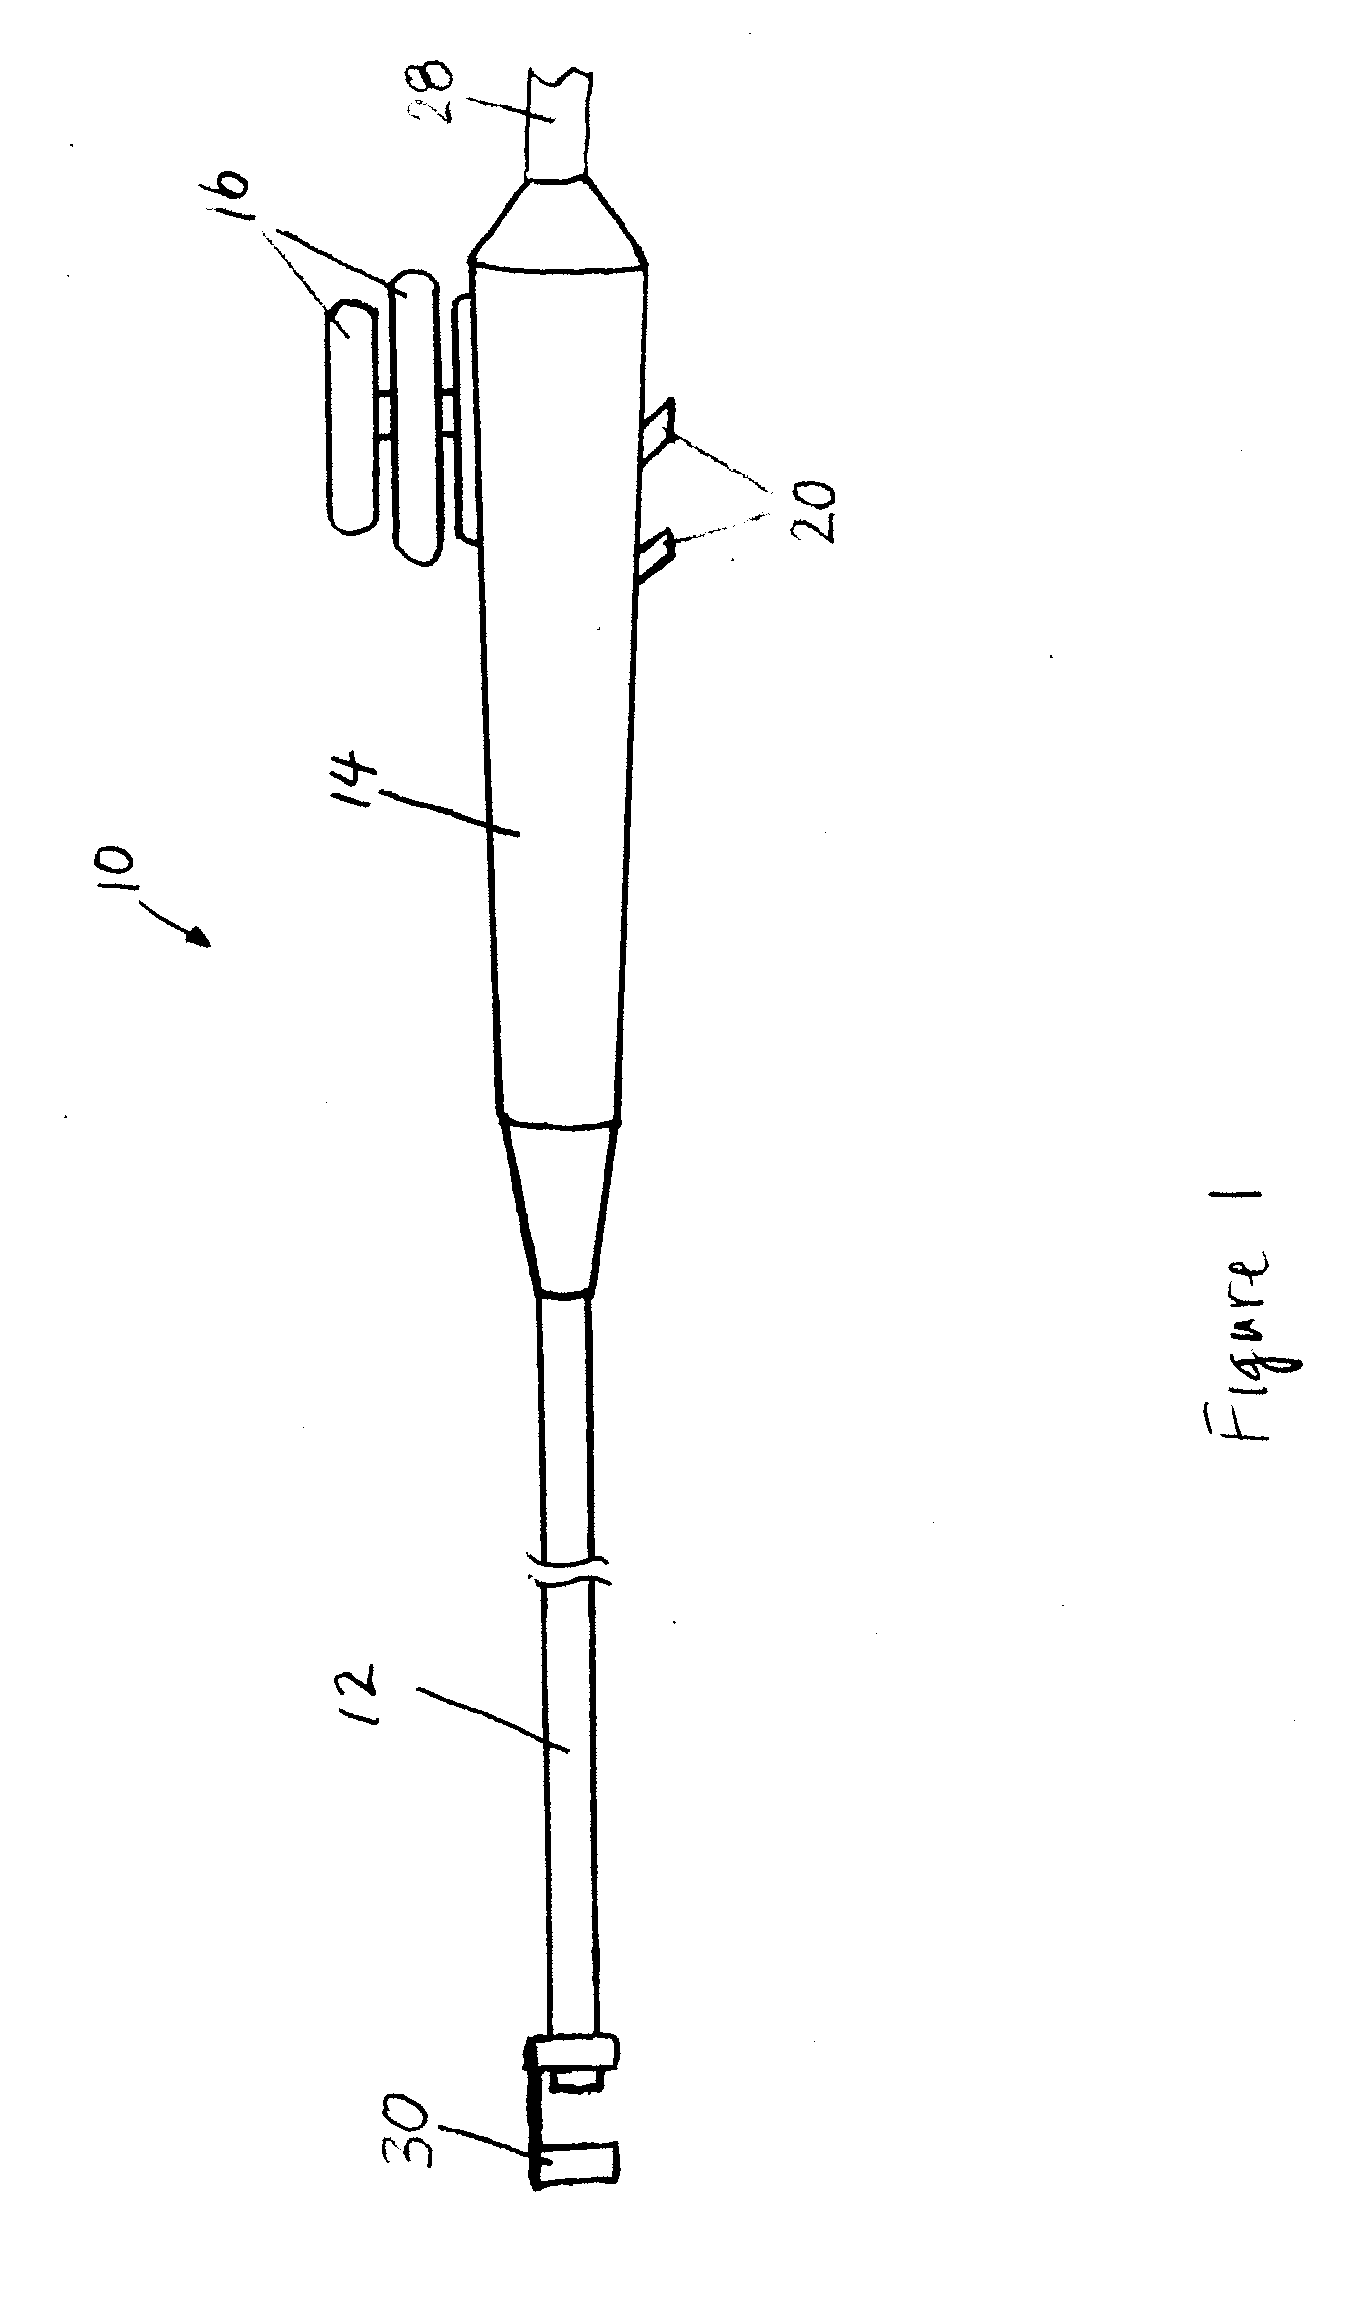 Detachable Imaging Device, Endoscope Having A Detachable Imaging Device, And Method of Configuring Such An Endoscope